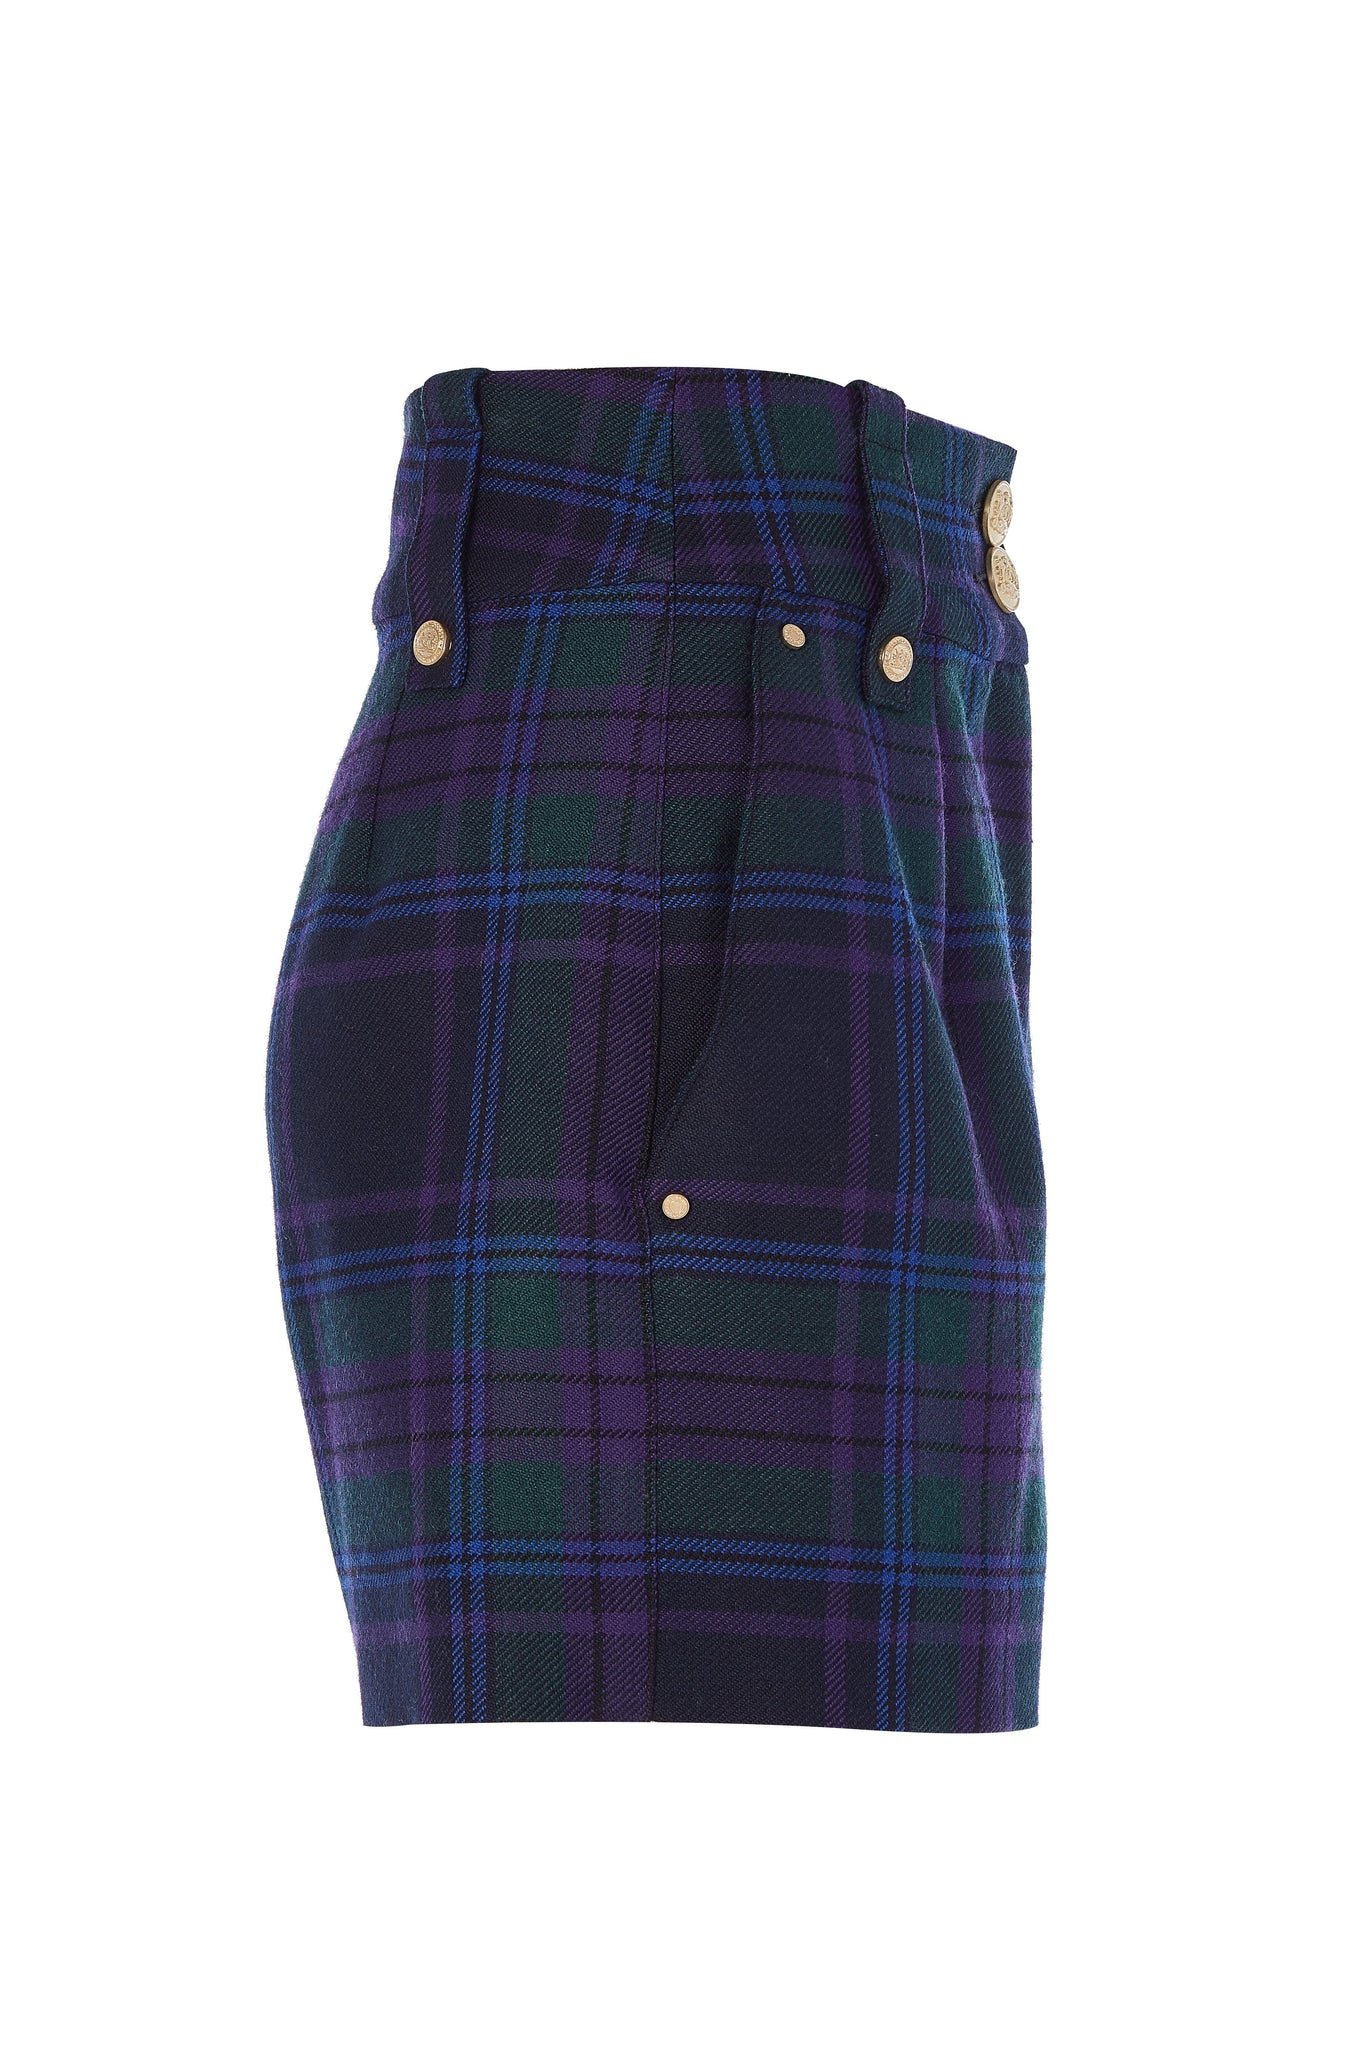 side of womens blue green and purple tartan high rise tailored shorts with two single knife pleats and centre front zip fly fastening with twin branded gold stud buttons and side hip pockets with branded rivet detailing at top and bottom of pockets